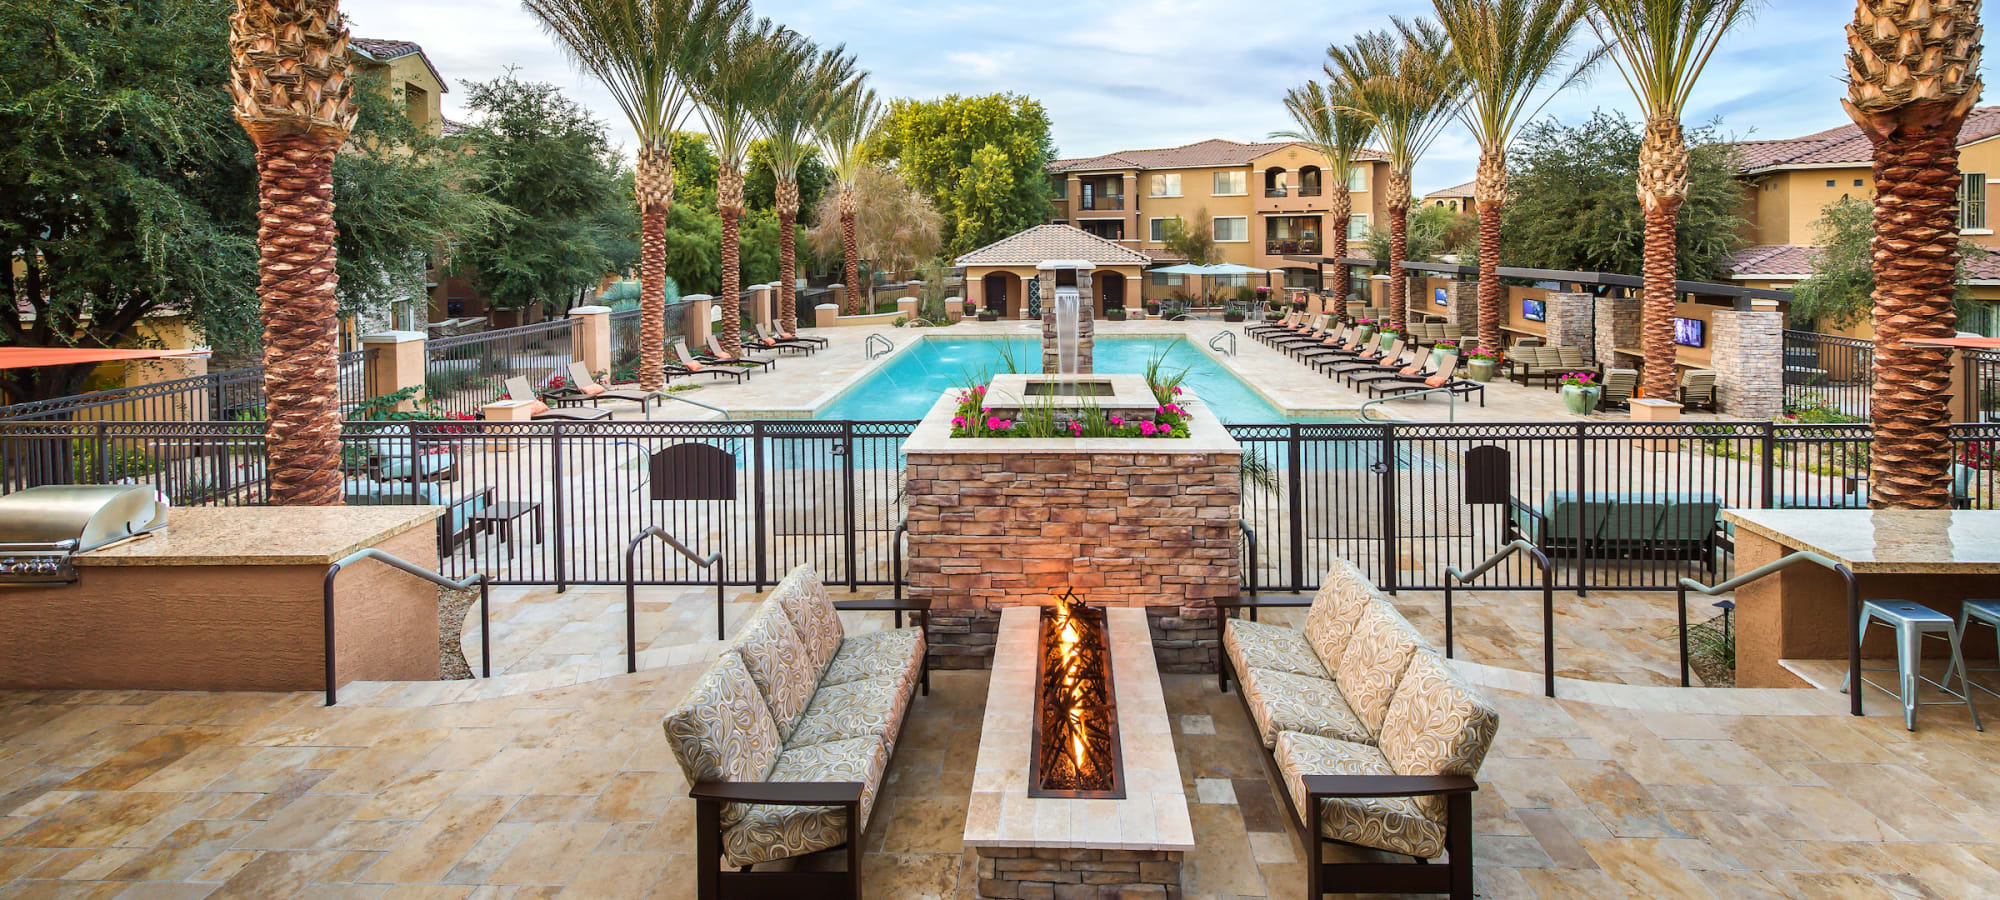 View of the swimming pool from one of the fire pits at Stone Oaks in Chandler, Arizona